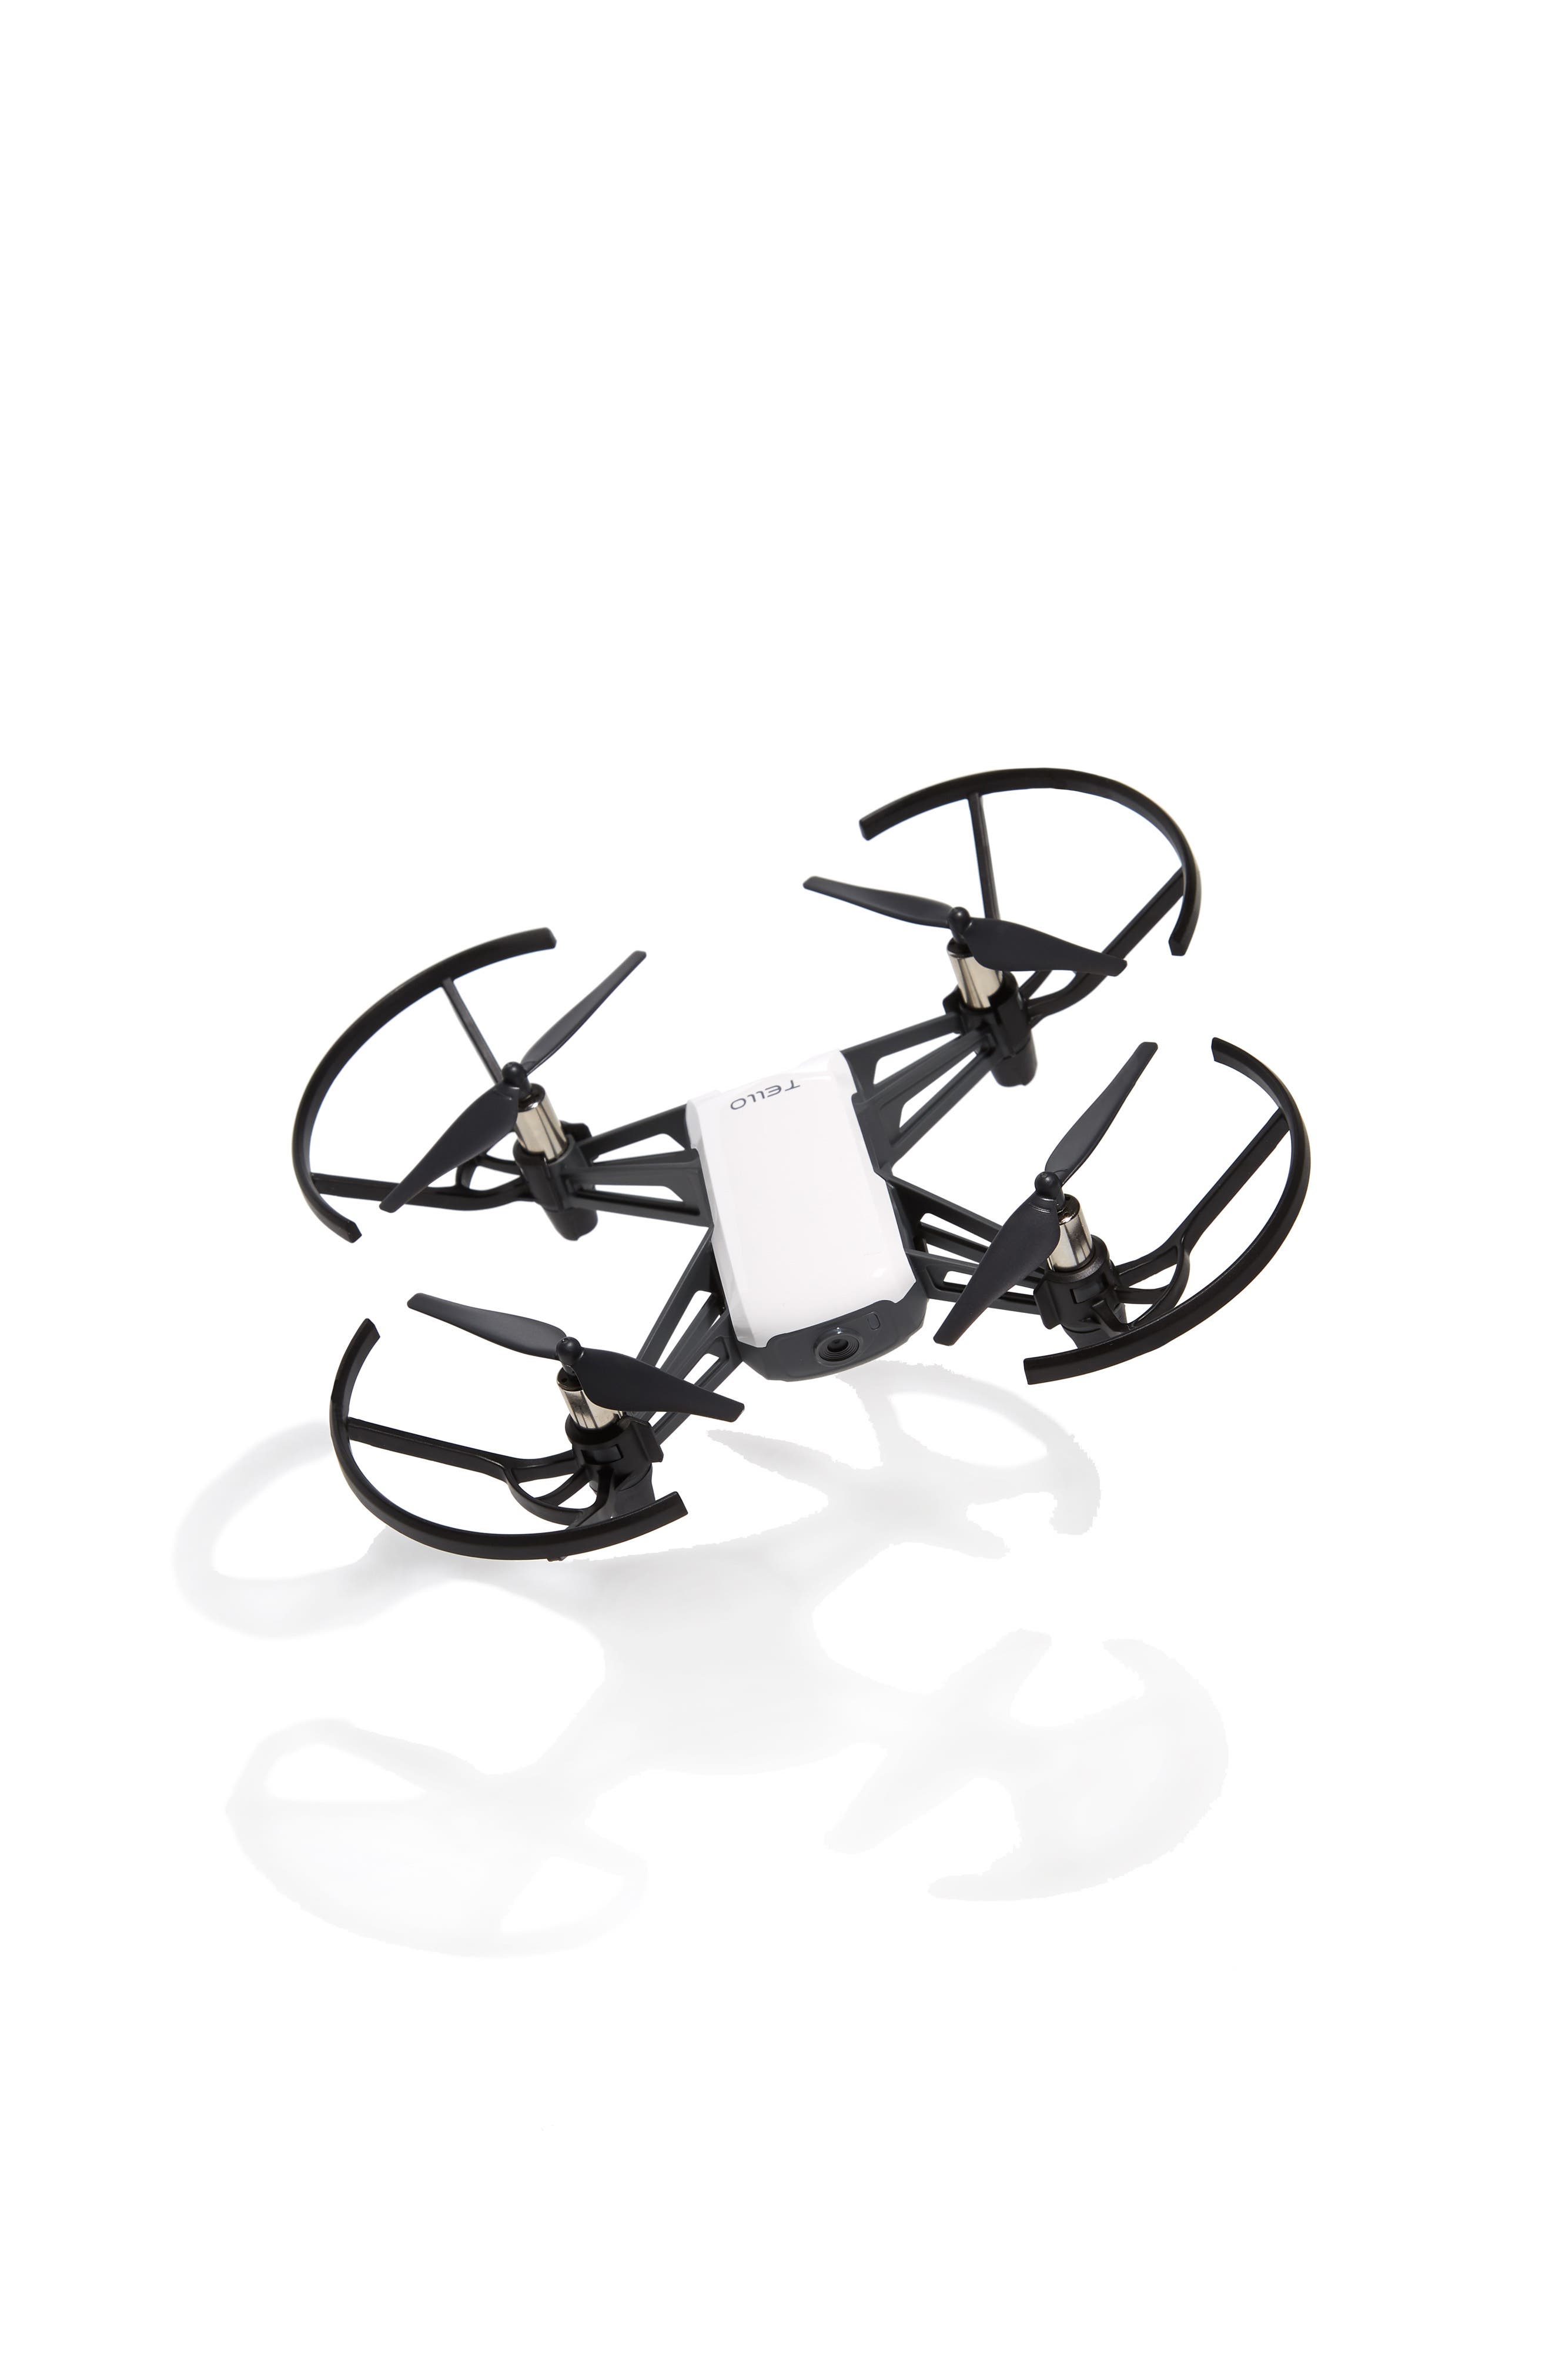 UPC 190021310568 product image for Dji Tello Flying Quadcopter With Hd Camera & Vr Compatibility, Size One Size - W | upcitemdb.com